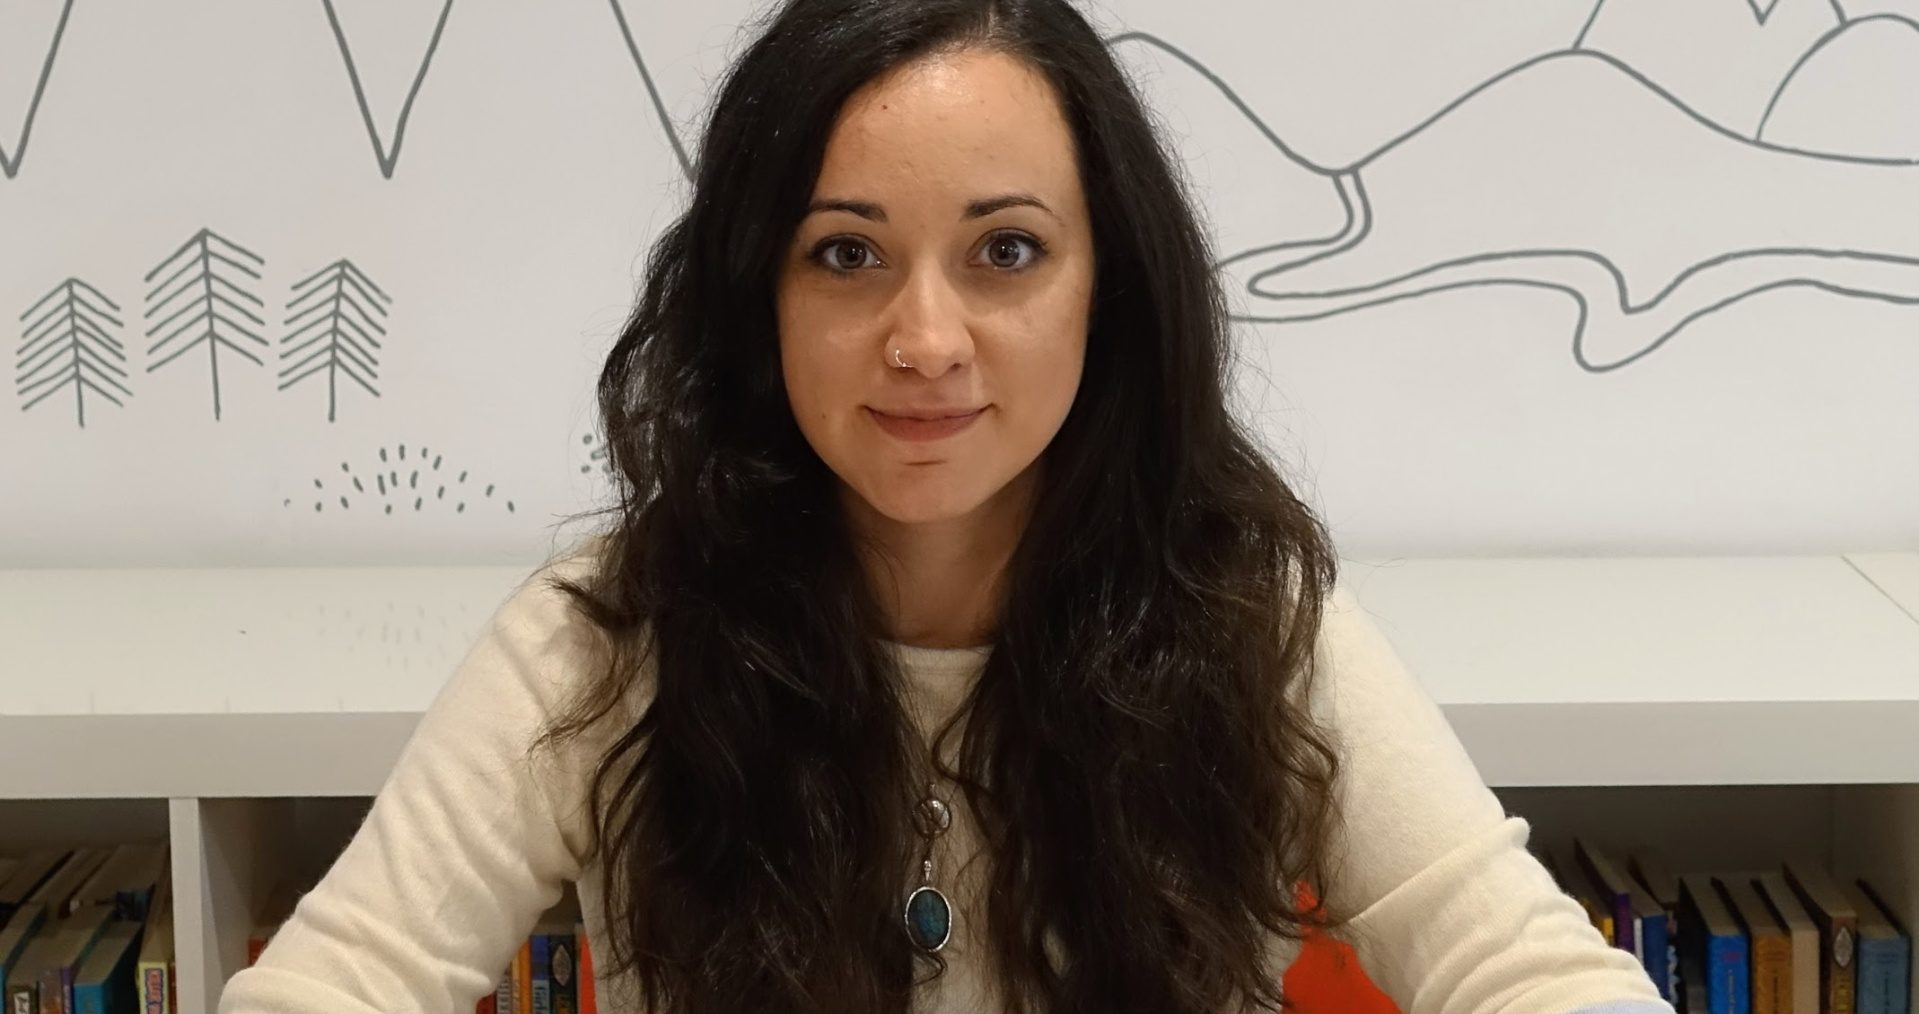 Alice has long dark, curly hair and is wearing a long sleeved white t-shirt. She has a silver nose ring, necklace and rings on. Her hands are clasped in front of her on the table and she is smiling at the camera.